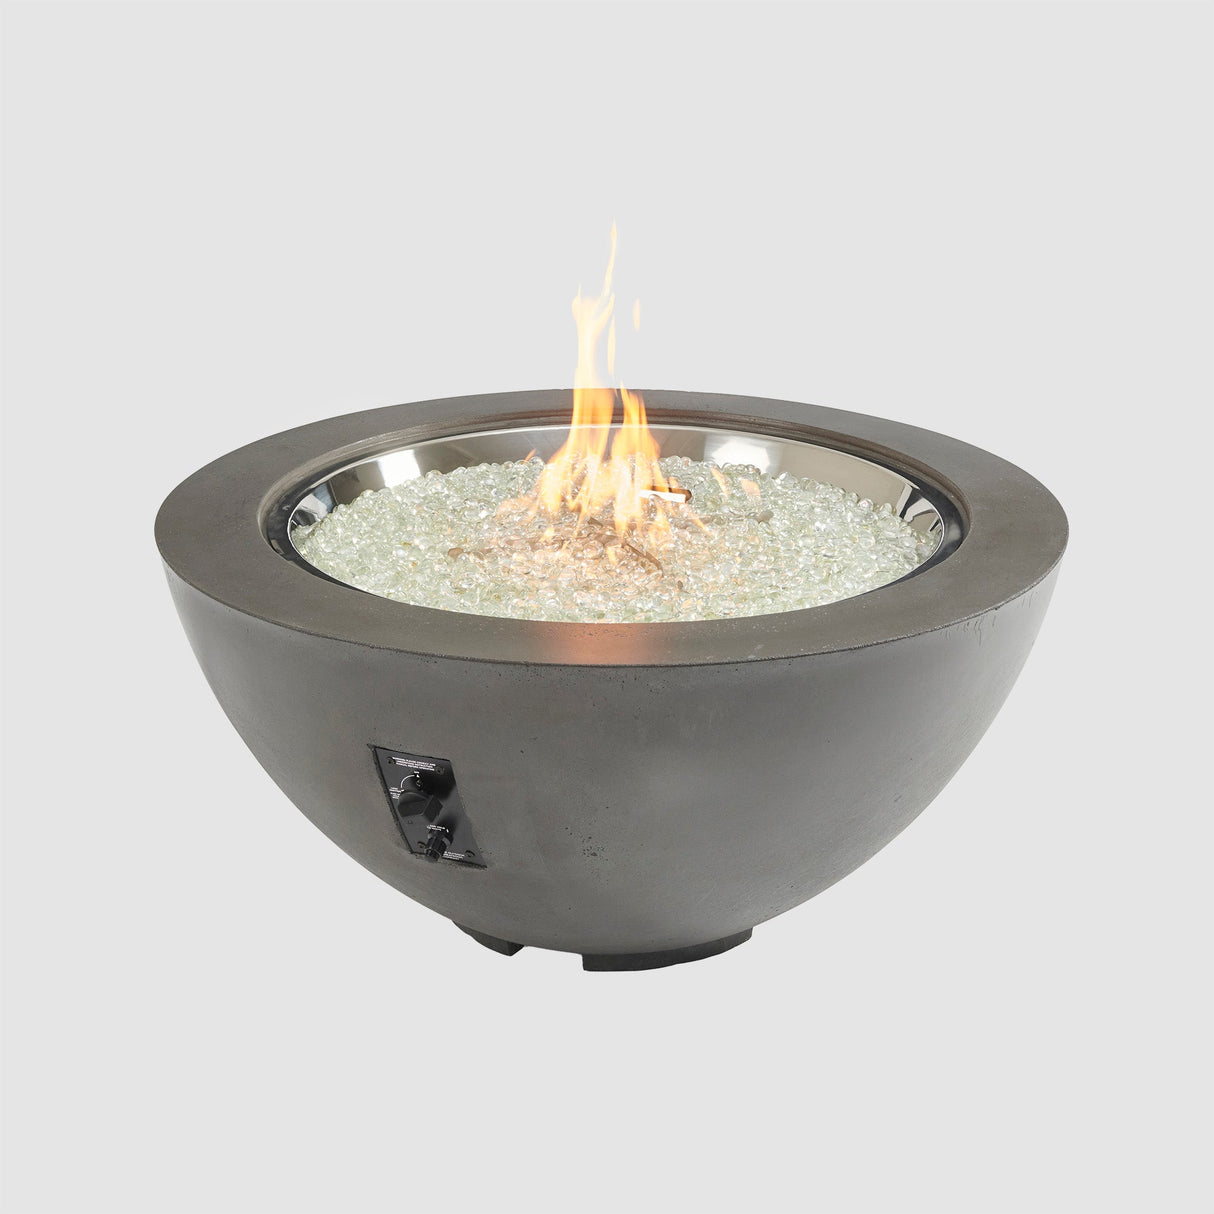 Cove Round Gas Fire Pit Bowl 42"